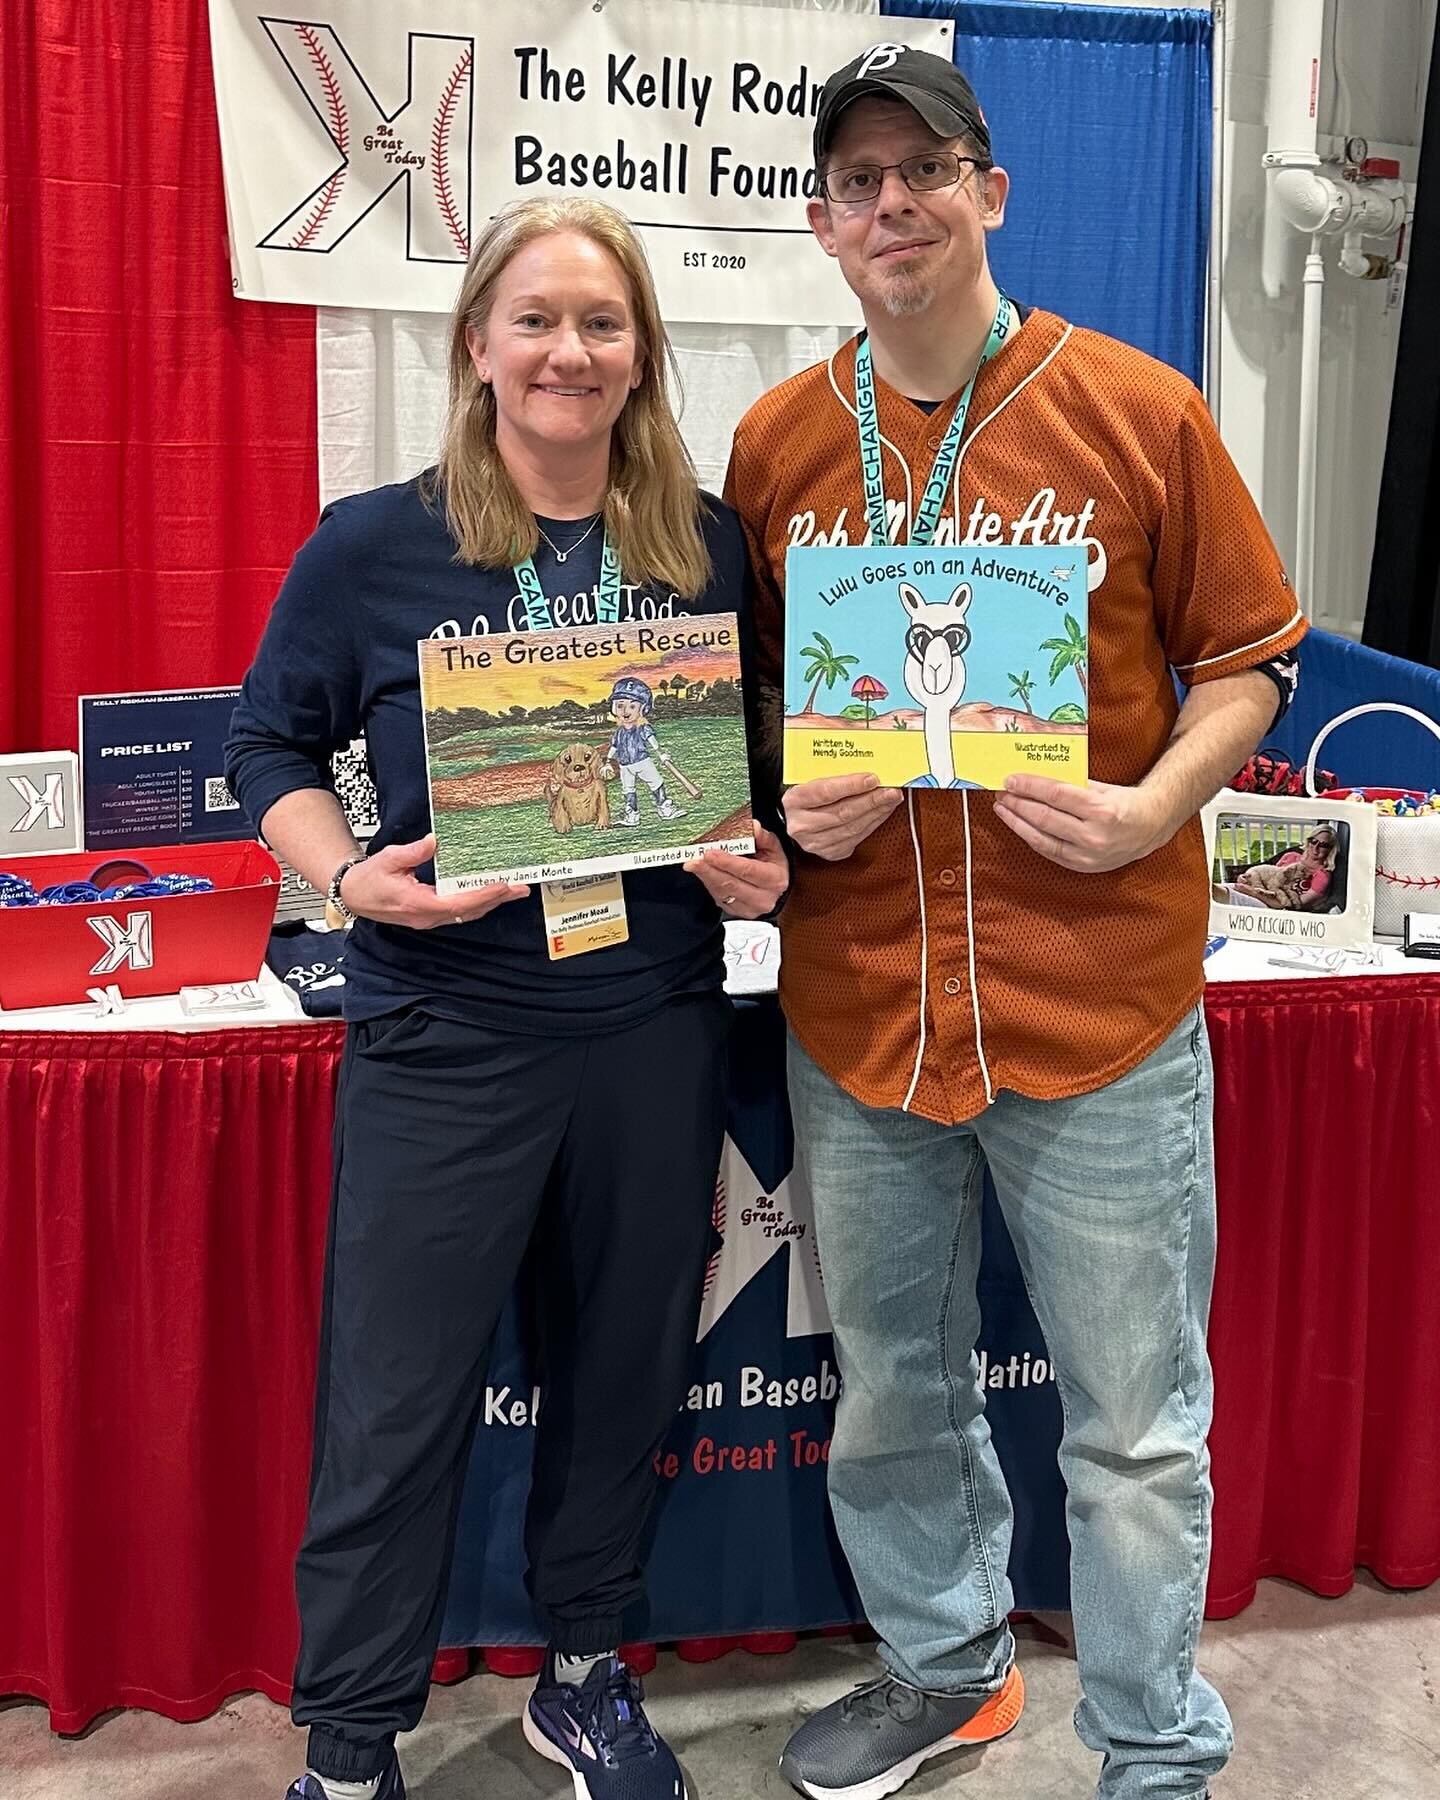 Thank you to the @worldbaseballcoachesconvention and @worldsoftballcoachesconvention for such an incredible event and inviting Kelly&rsquo;s foundation booth to be part of the exhibit hall. The newly released book, The Greatest Rescue, was a huge hit